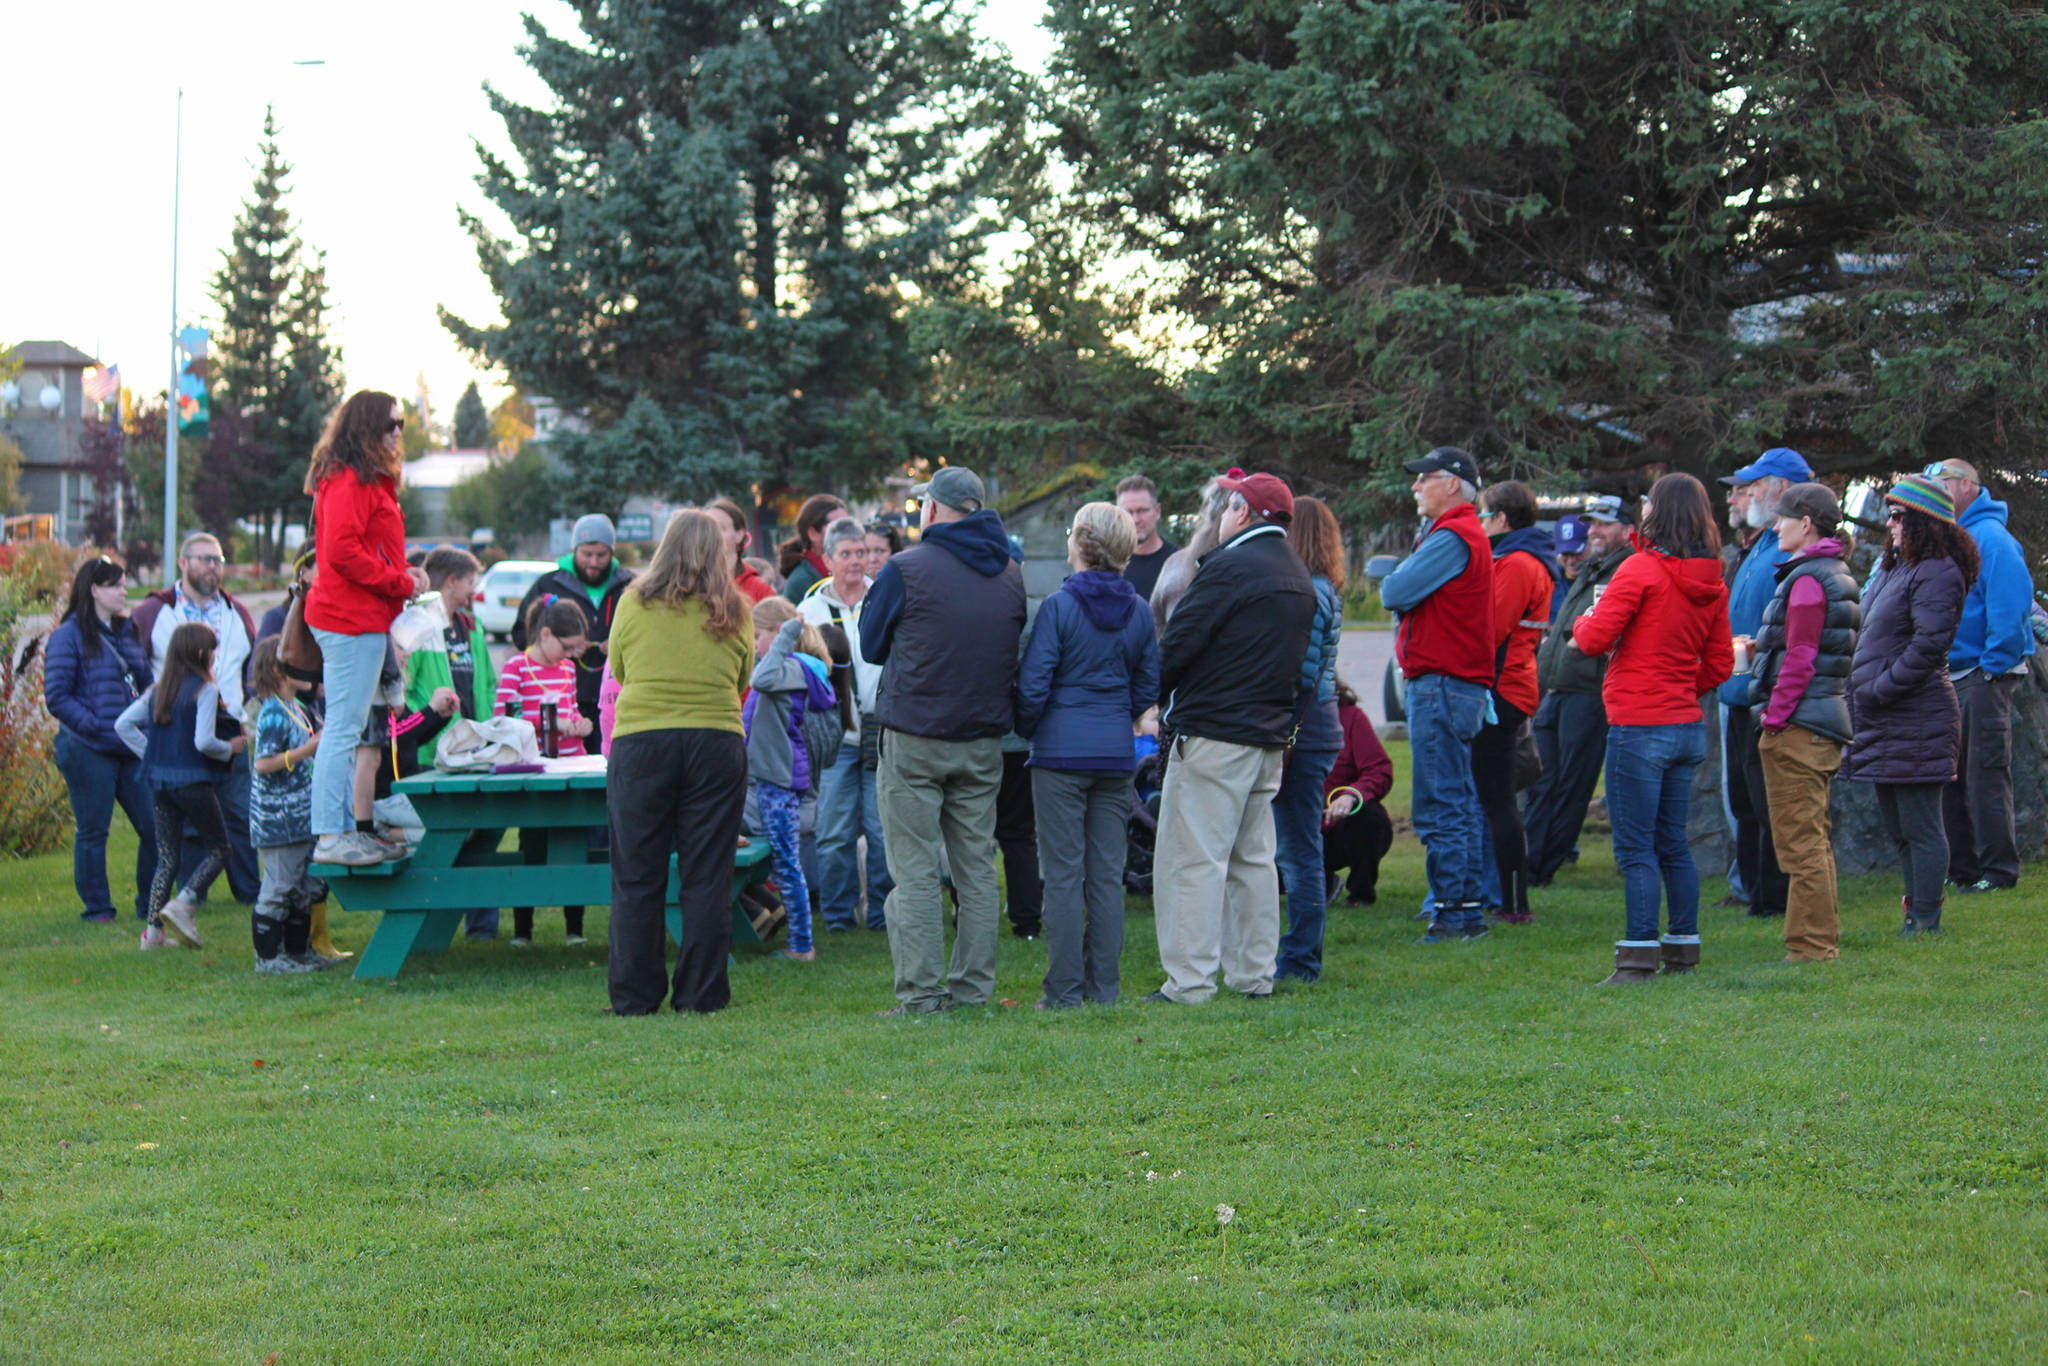 Participants in a Light the Night march listen to Kerri-Ann Baker of The Bearded Sister give a short speech before leading people on the walk Saturday, Sept. 29, 2018 from WKFL Park in Homer, Alaska. This is the first time a Light the Night march has been held in Homer, with the purpose being to remember those lost to addiction and those living in recovery. (Photo by Megan Pacer/Homer News)